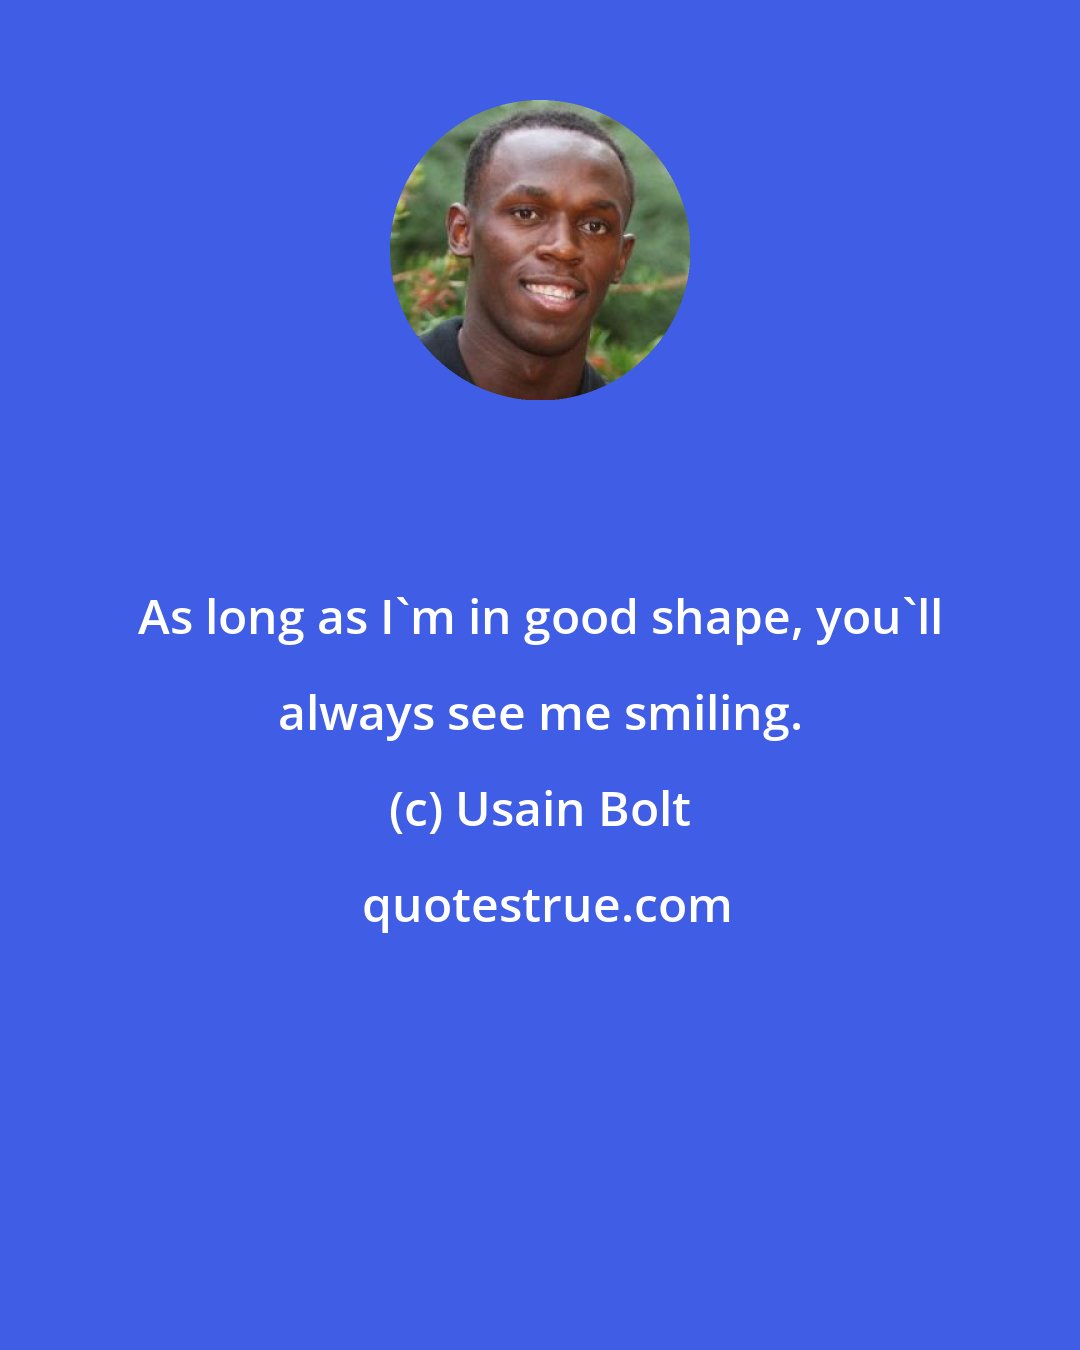 Usain Bolt: As long as I'm in good shape, you'll always see me smiling.